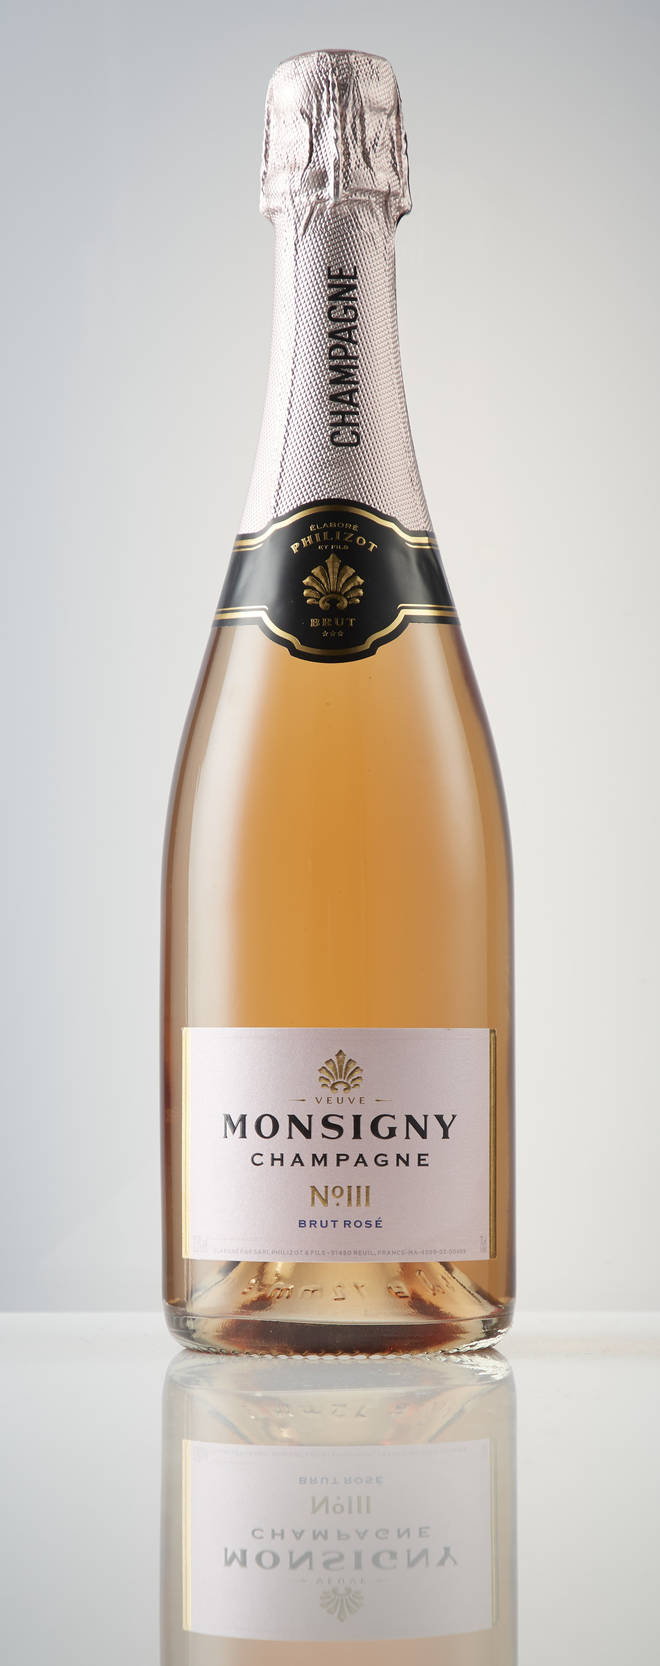 A glass of pink bubbles will add a touch of glam to Mother's Day